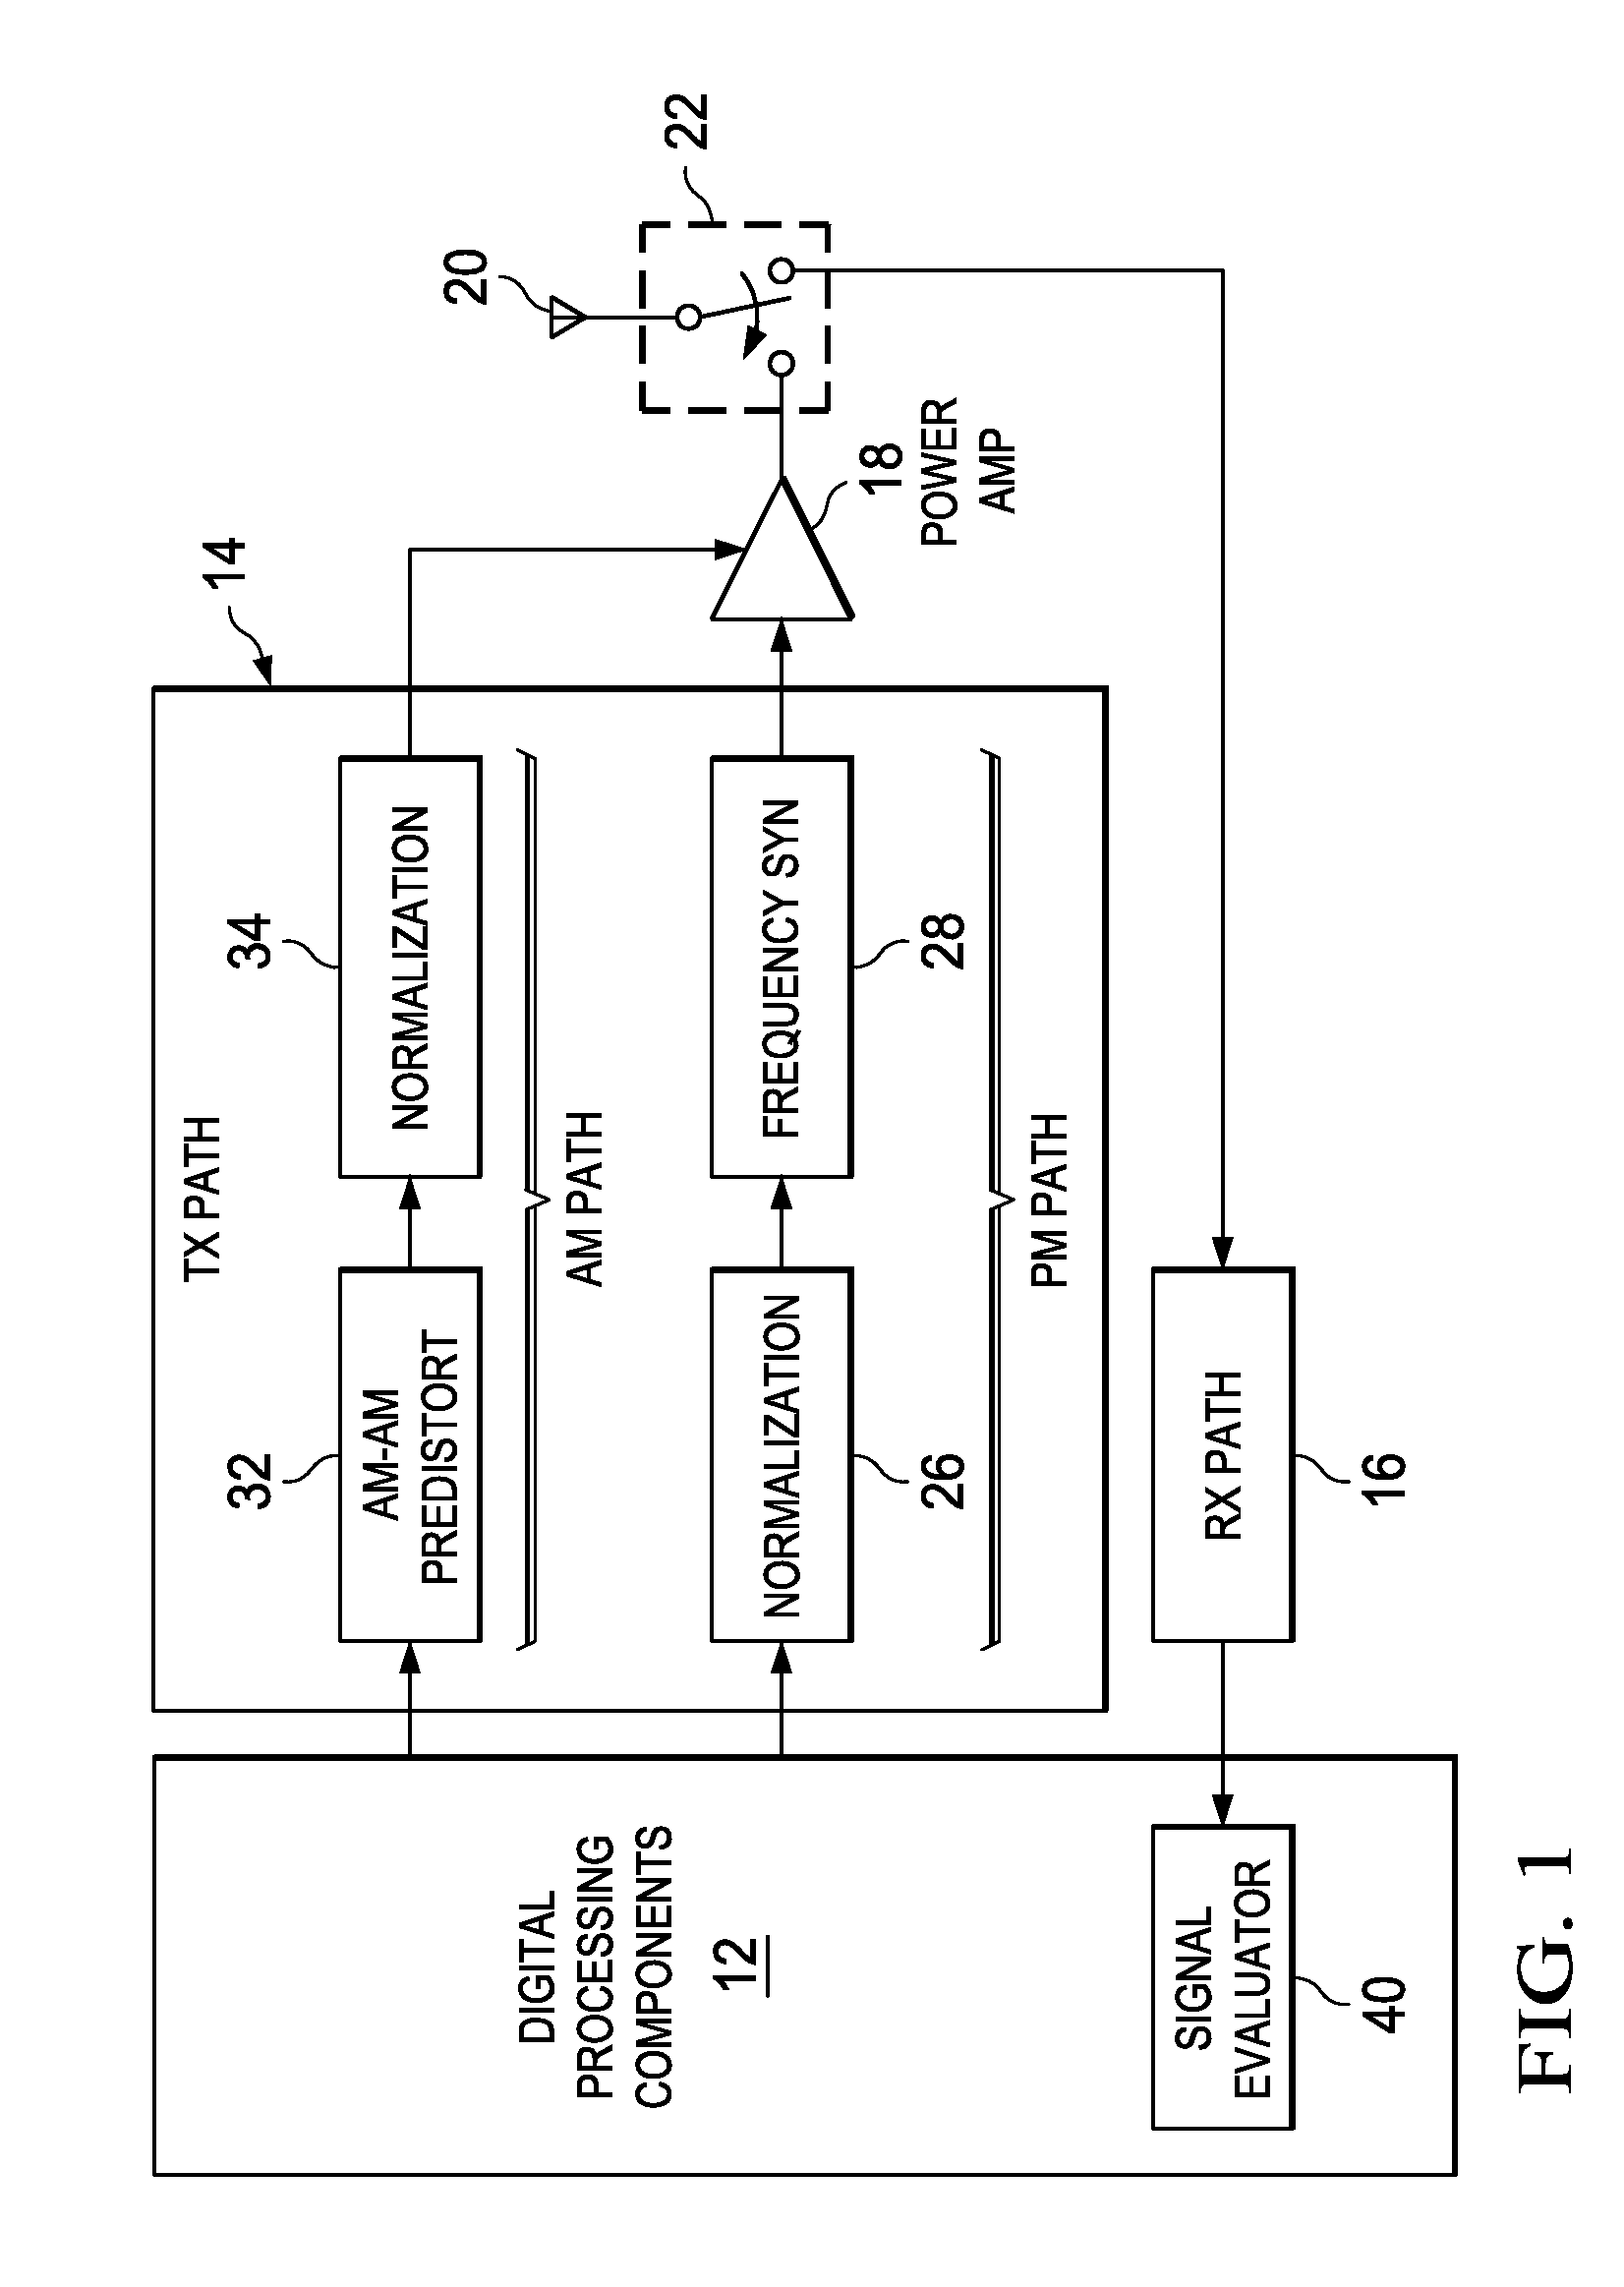 Predistortion calibration in a transceiver assembly